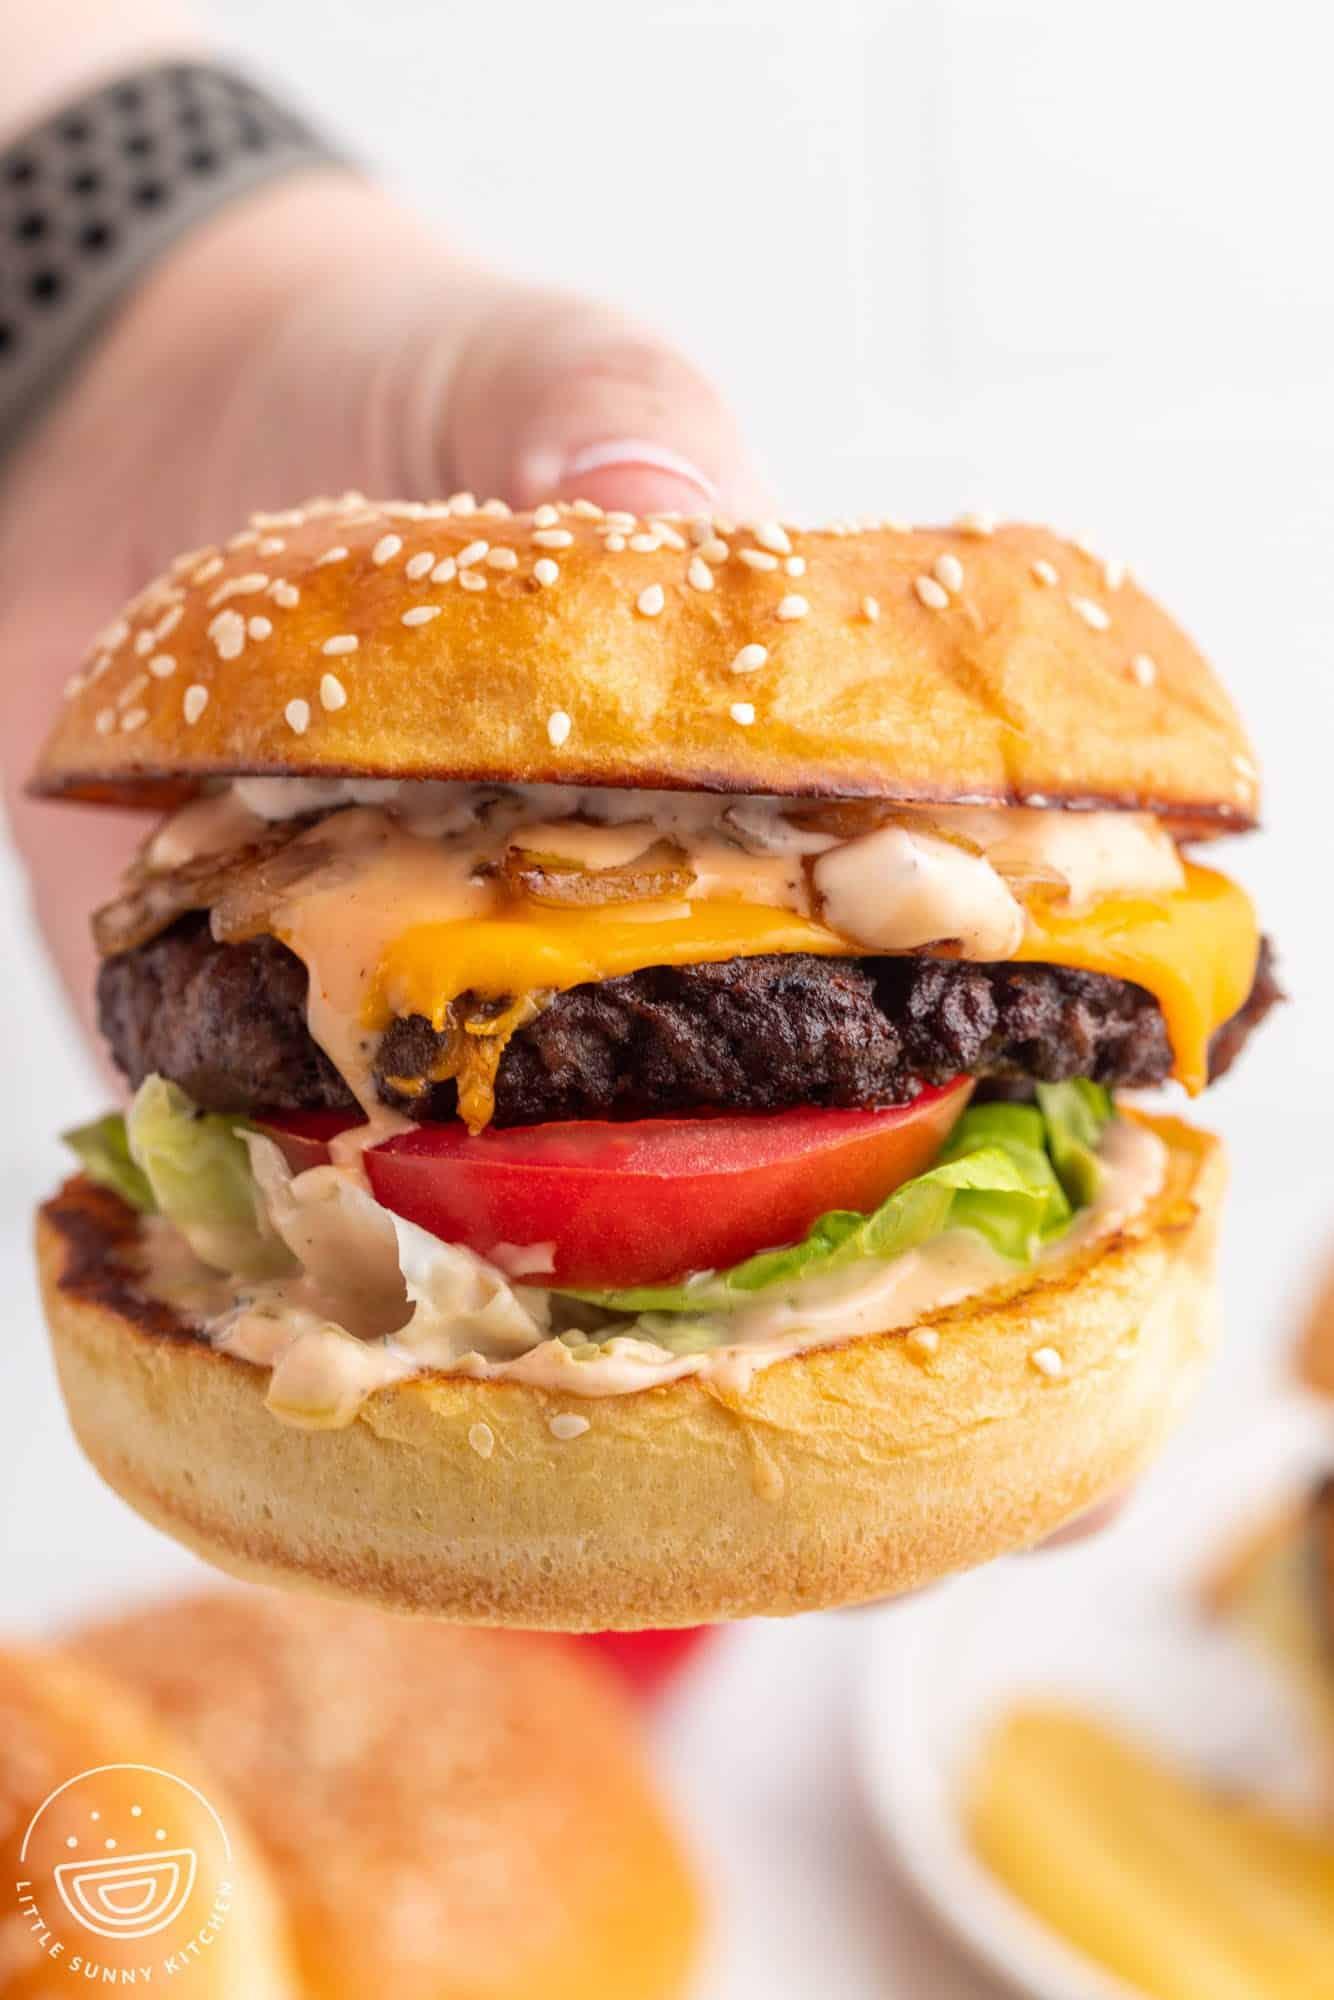 A hand holding a juicy stovetop burger with all the toppings.